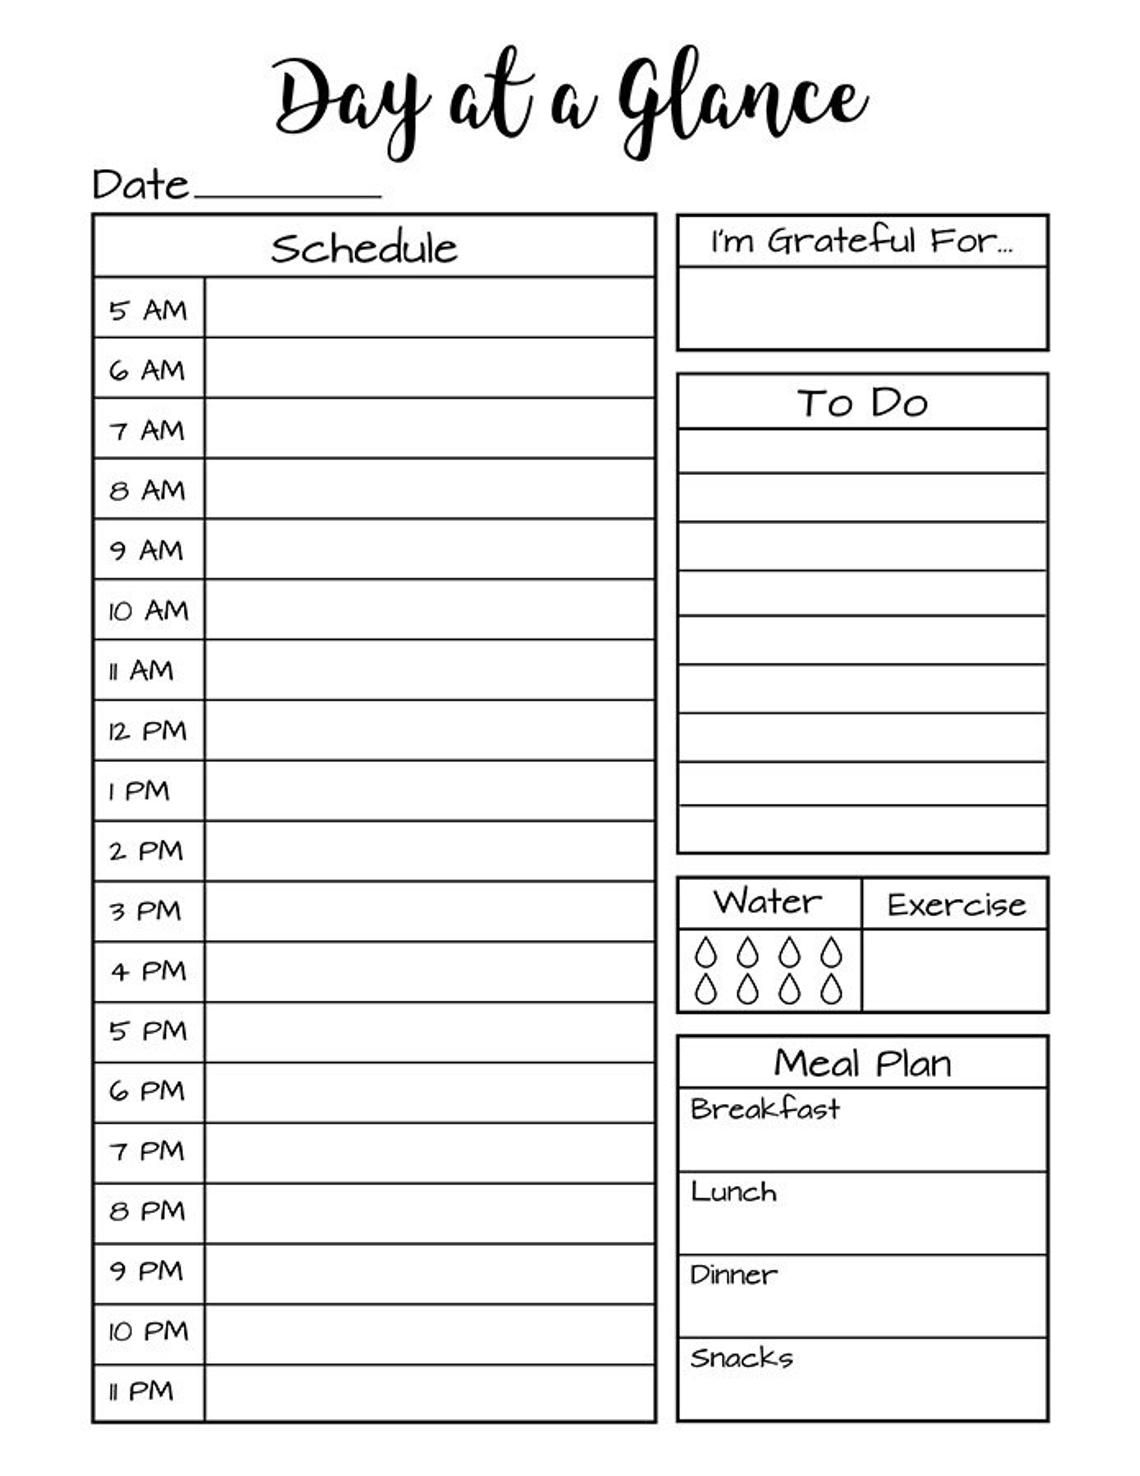 Month At A Glance Printable + Day At A Glance Bullet Journal throughout Schedule At A Glance Template